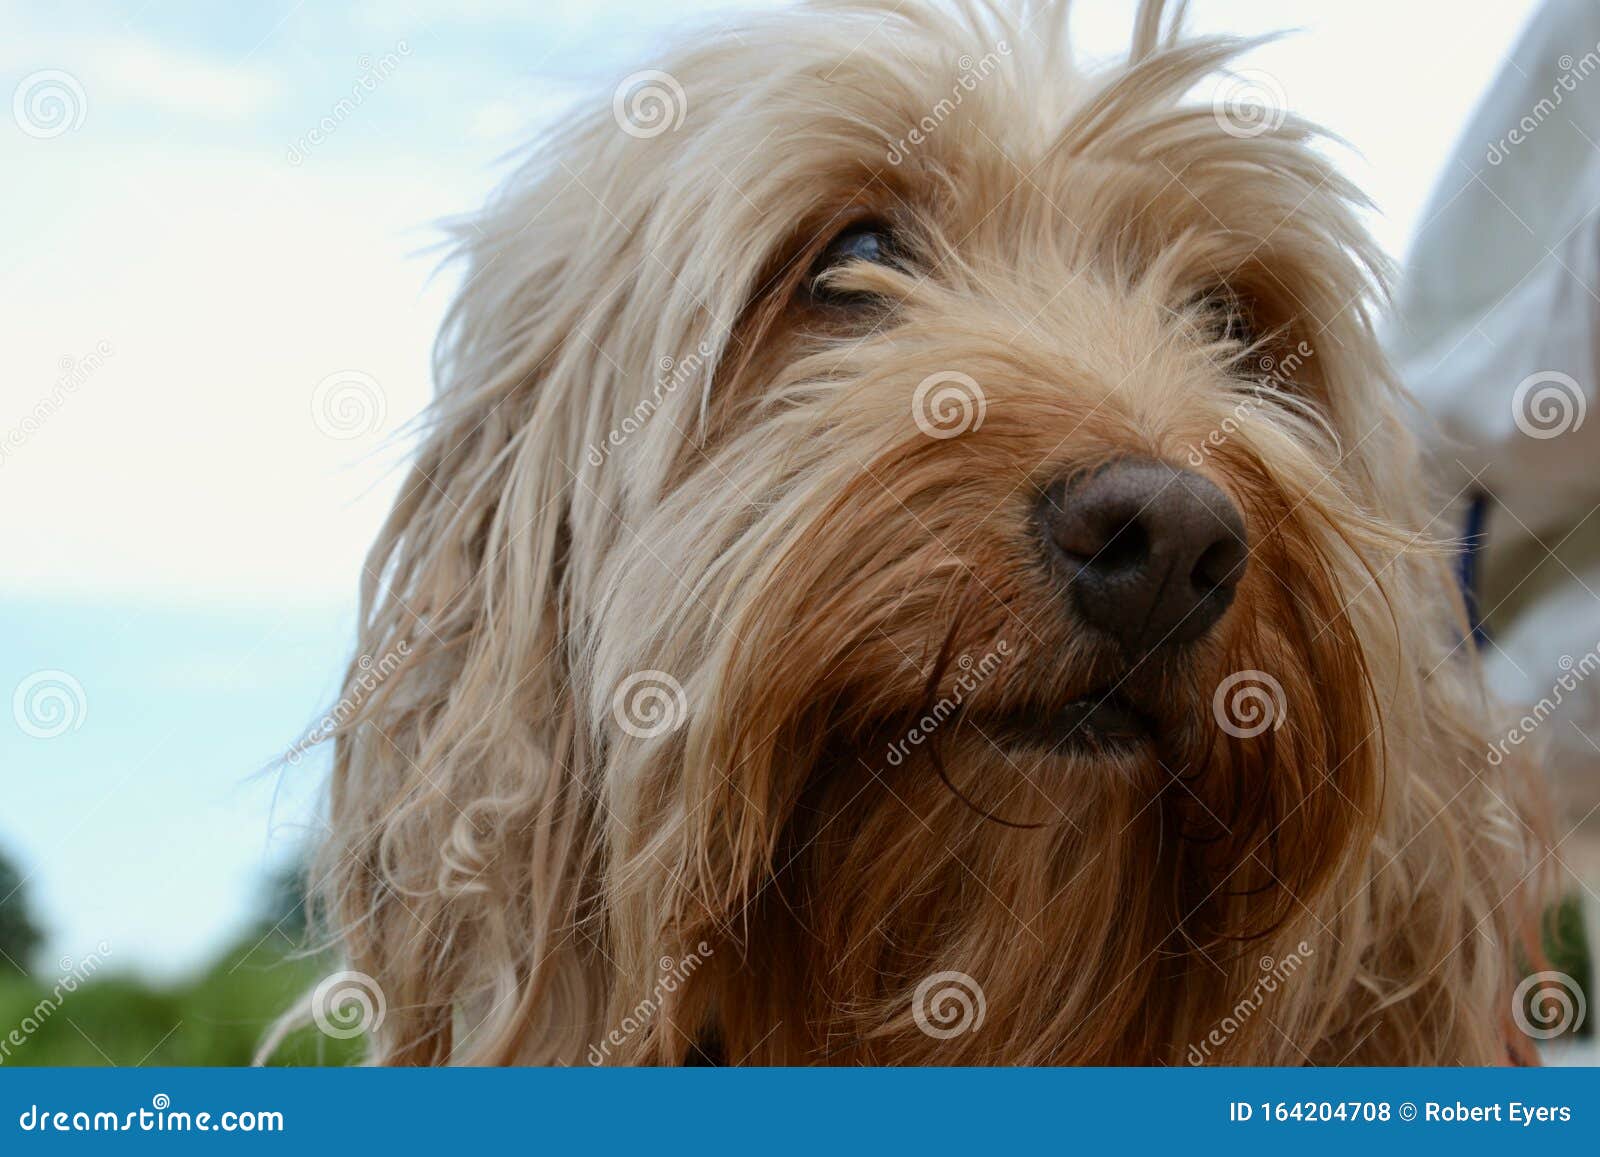 Face Of A Cute Apricot Long Haired Cockapoo Stock Photo Image Of Poodle Blonde 164204708